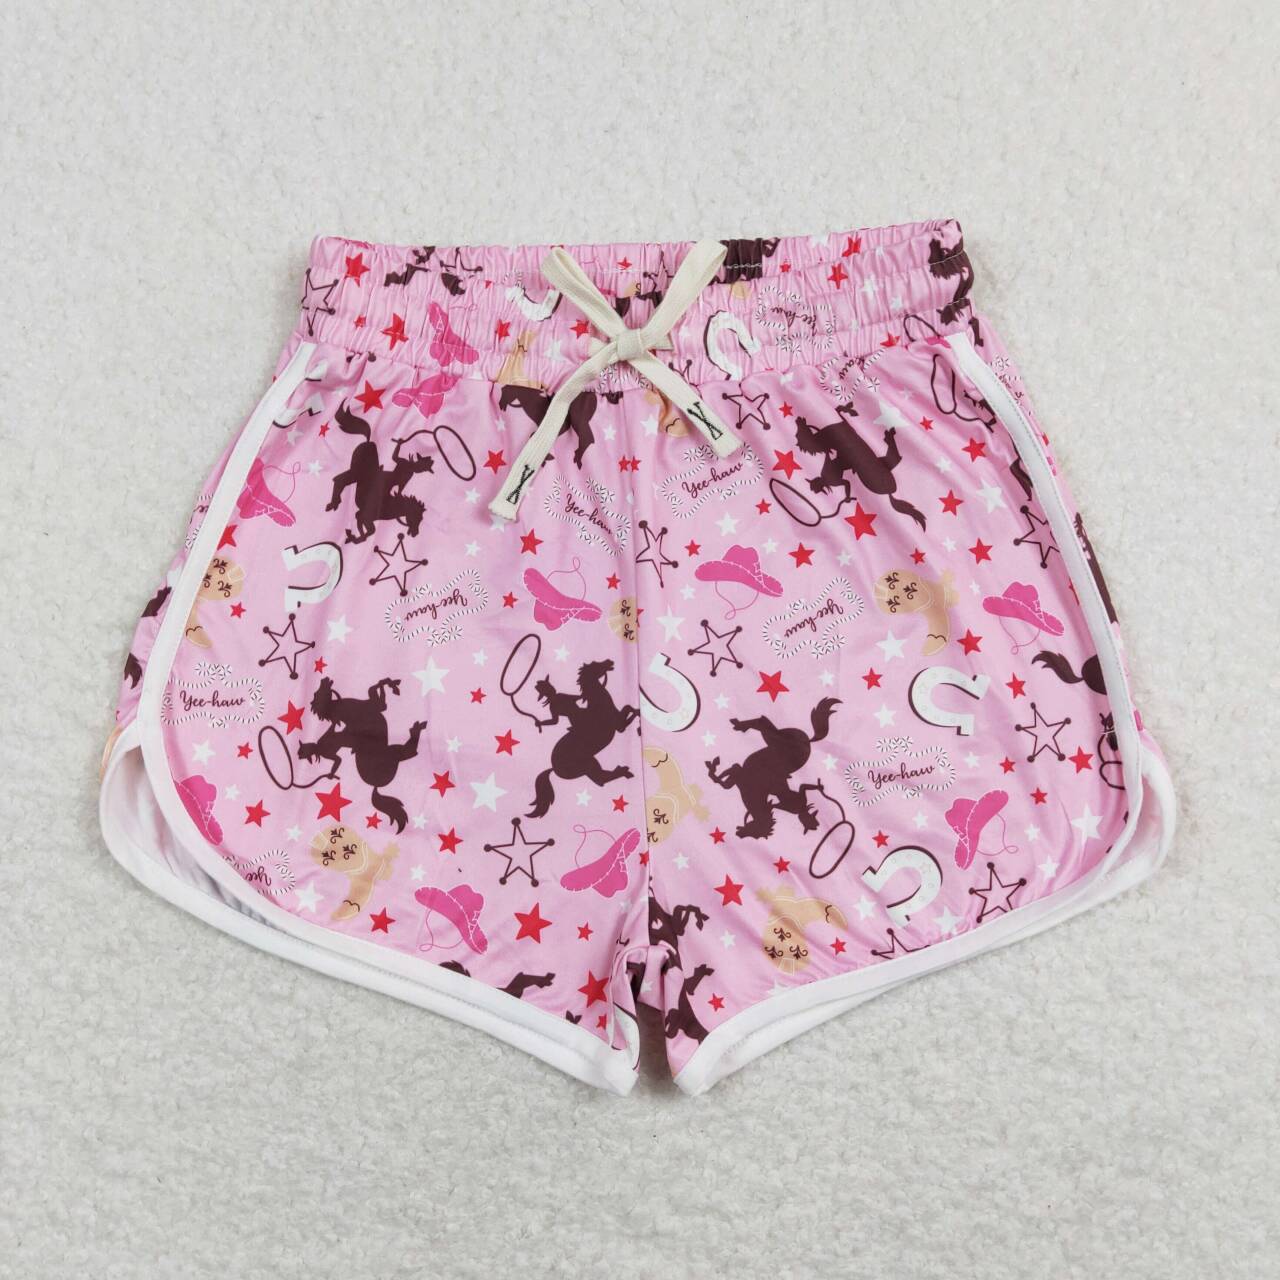 SS0130 Adult Pink Rodeo Print Summer Western Woman Shorts